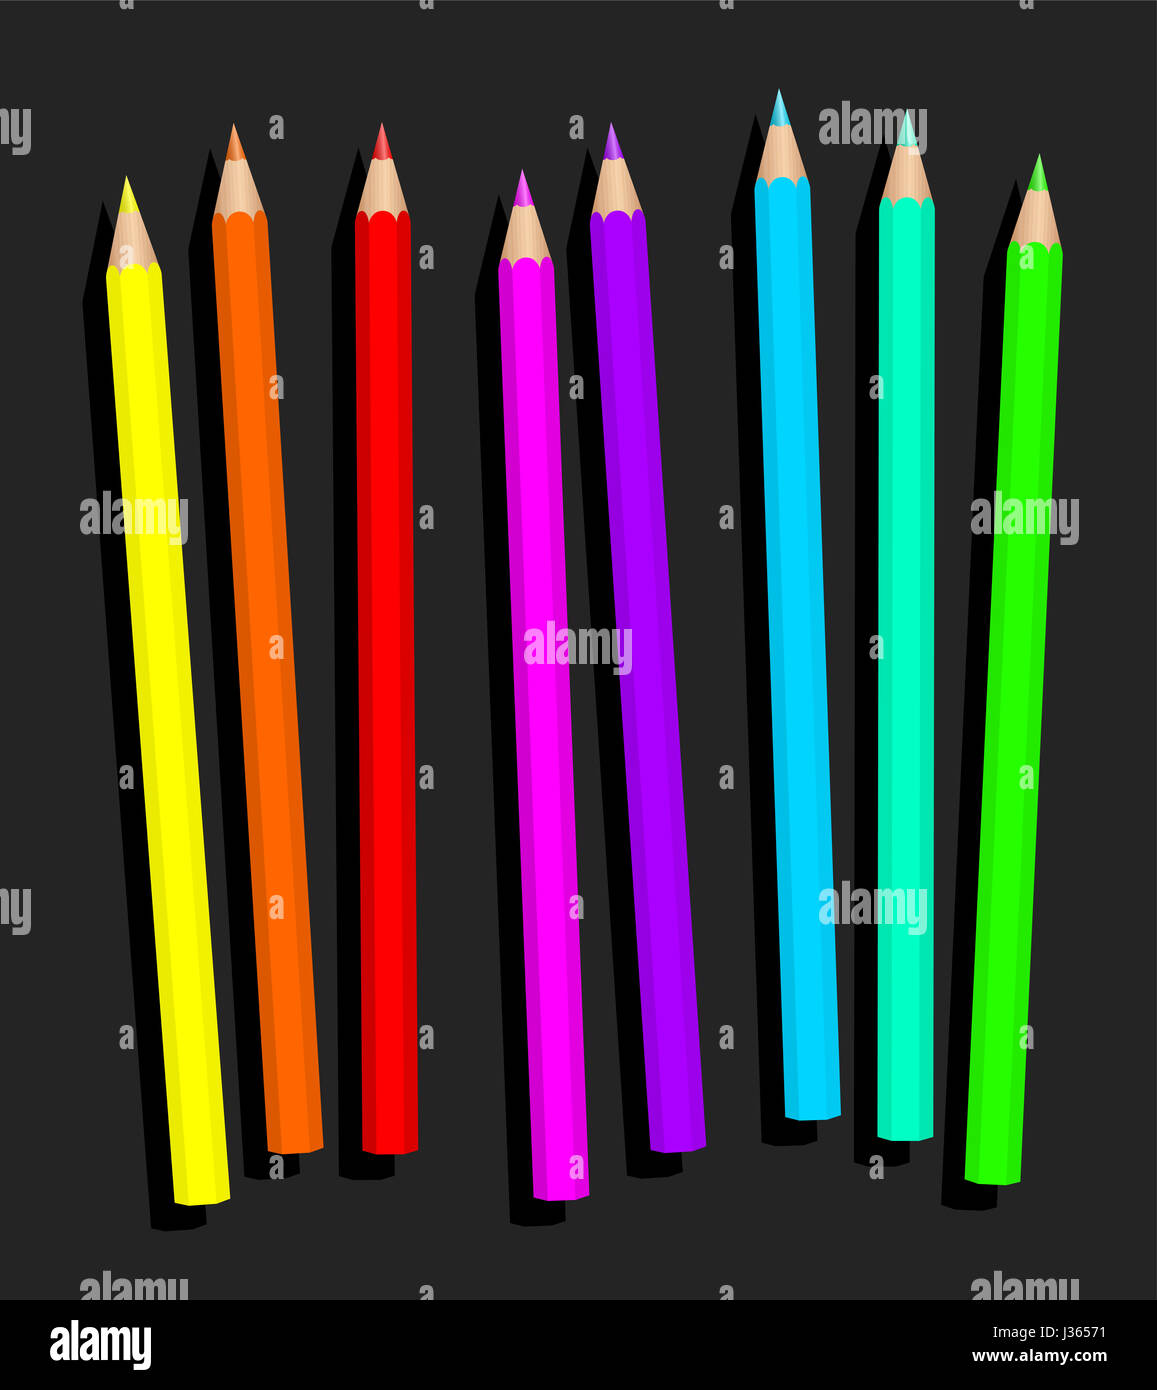 Neon pencil set, loosely arranged - fluorescent crayons for dynamically and glary colored drawings - isolated illustration on gray background. Stock Photo